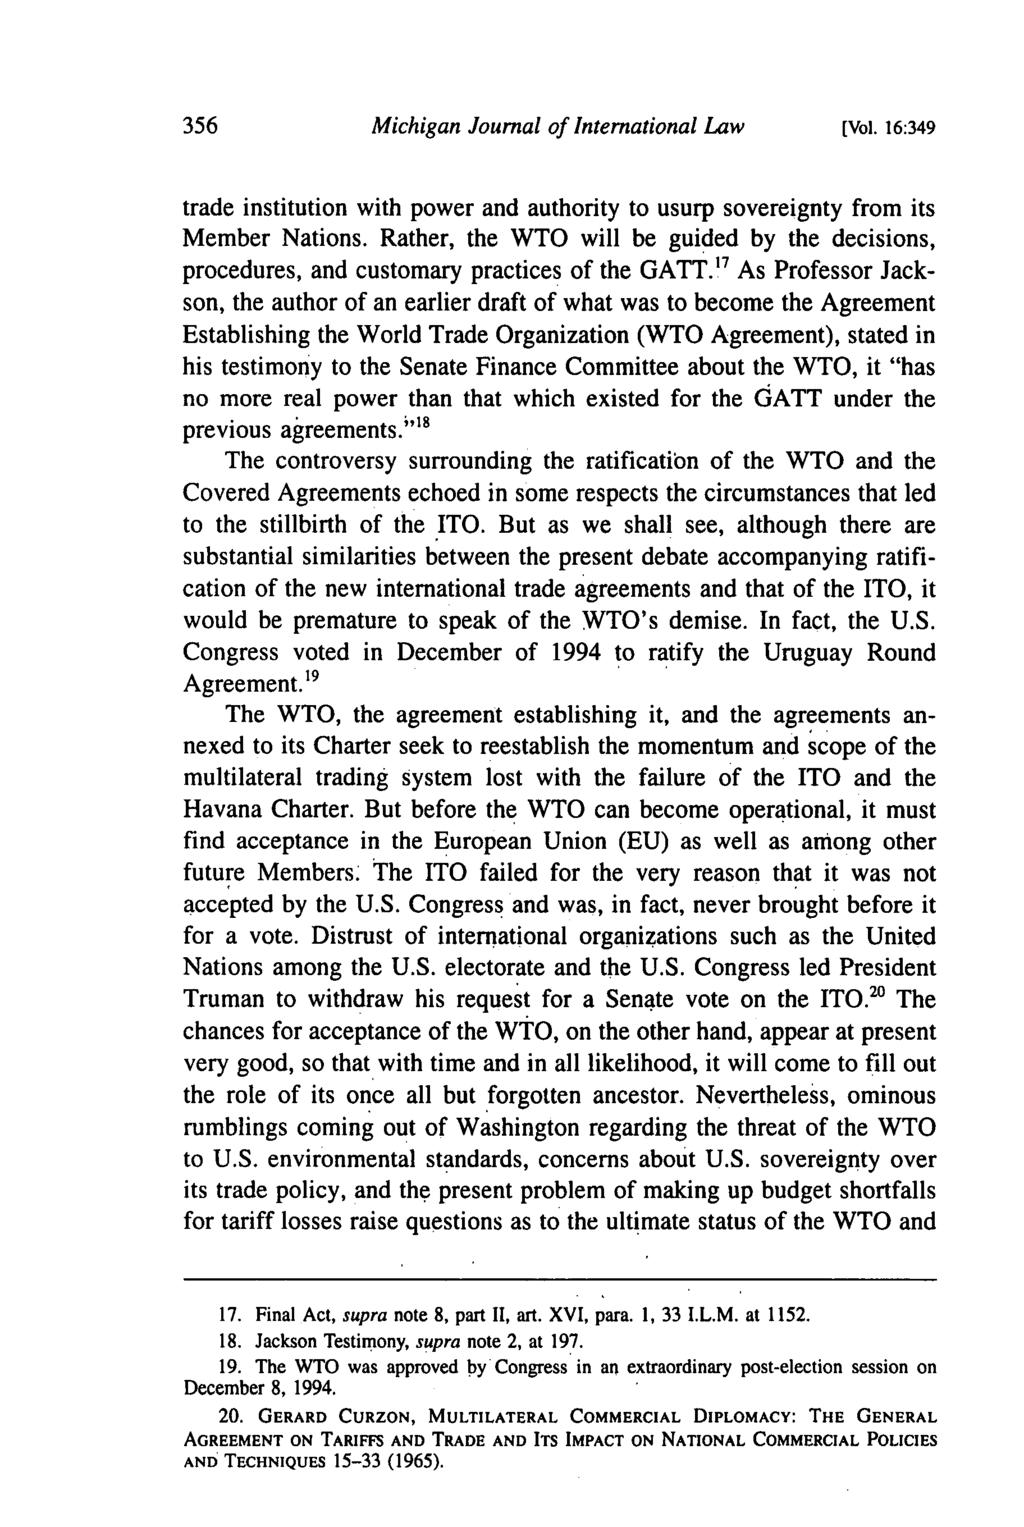 [Vol. 16:349 trade institution with power and authority to usurp sovereignty from its Member Nations. Rather, the WTO will be guided by the decisions, procedures, and customary practices of the GATT.